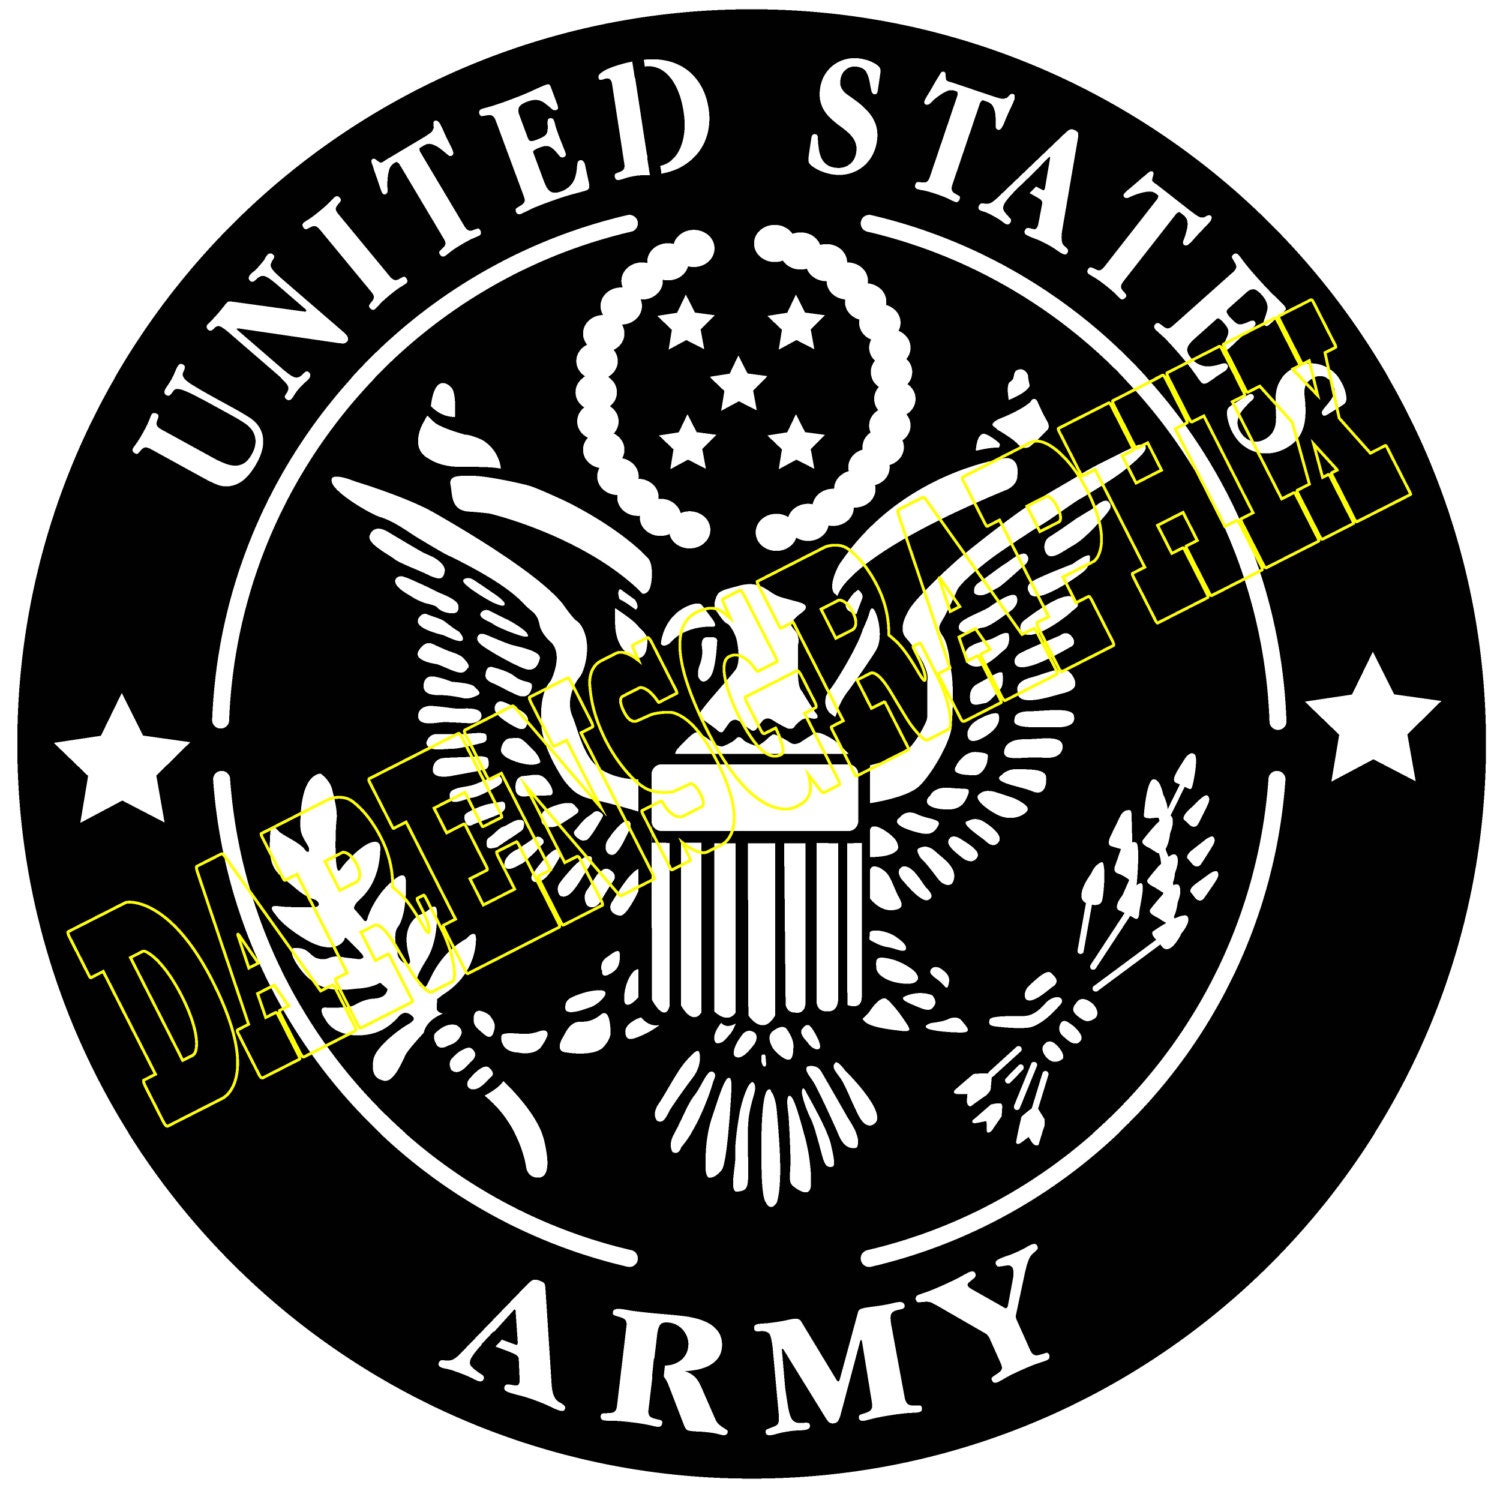 DXF file of the U.S Army emblem for use with a CNC machine.